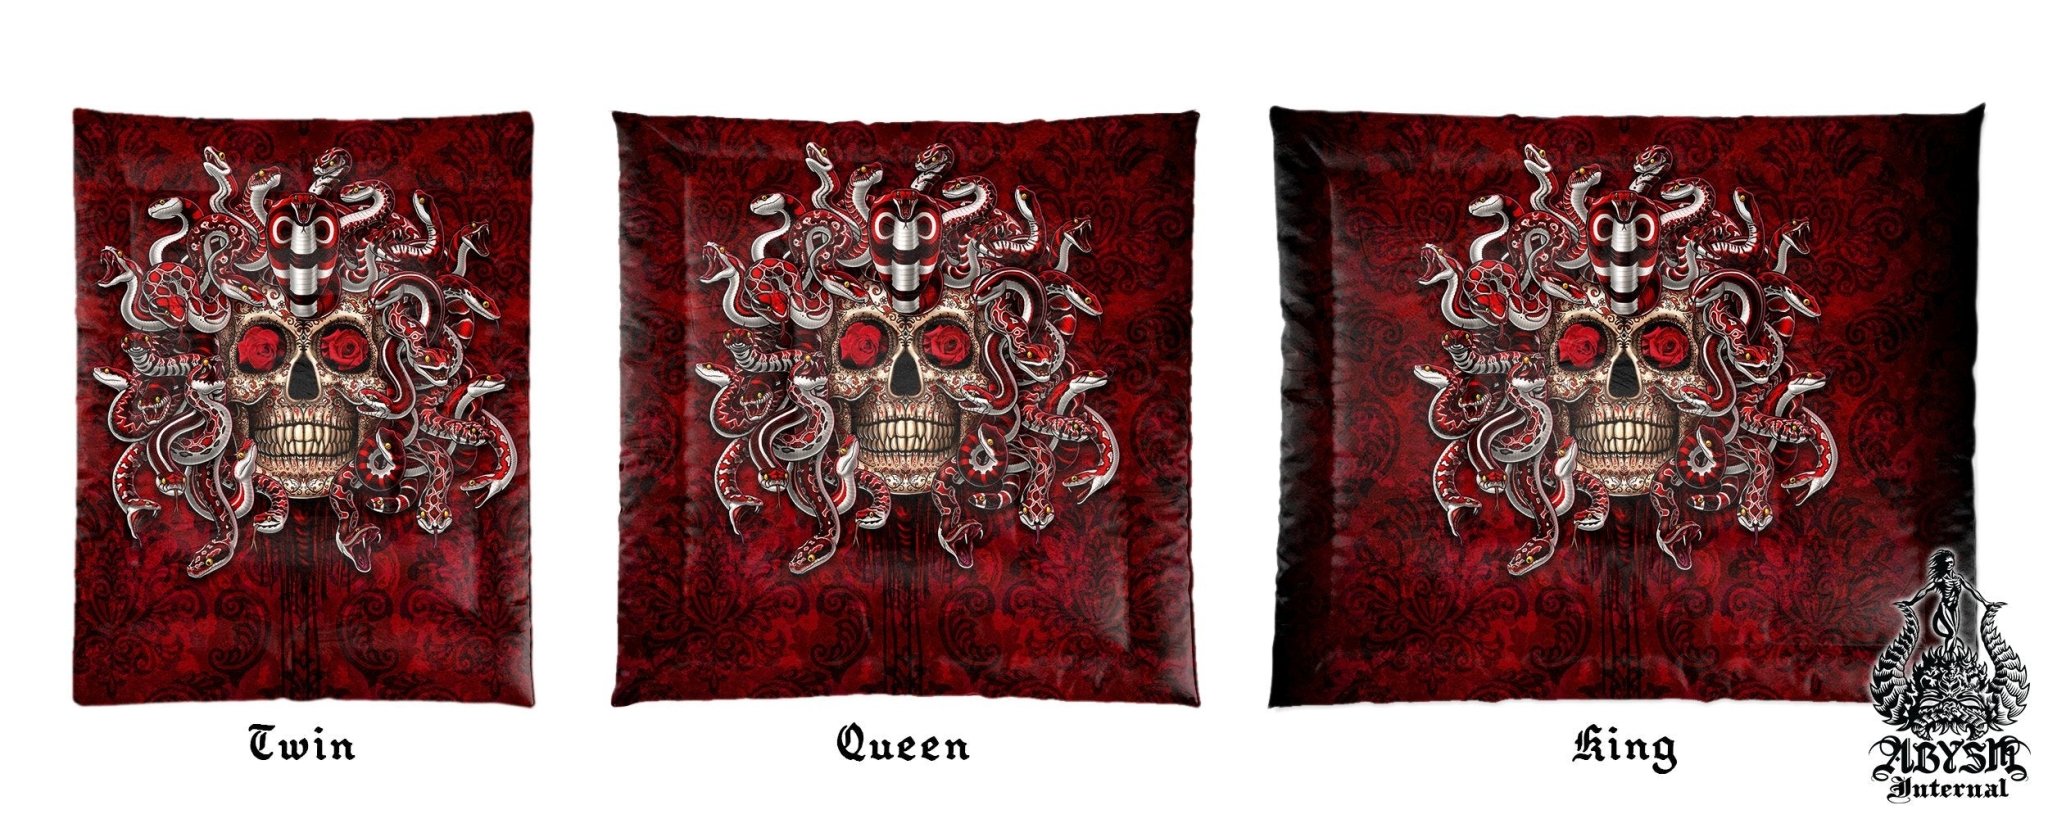 Sugar Skull Bedding Set, Comforter and Duvet, Medusa, Gothic Bed Cover and Bedroom Decor, King, Queen and Twin Size - Day of the Dead, Dia de los Muertos - Abysm Internal